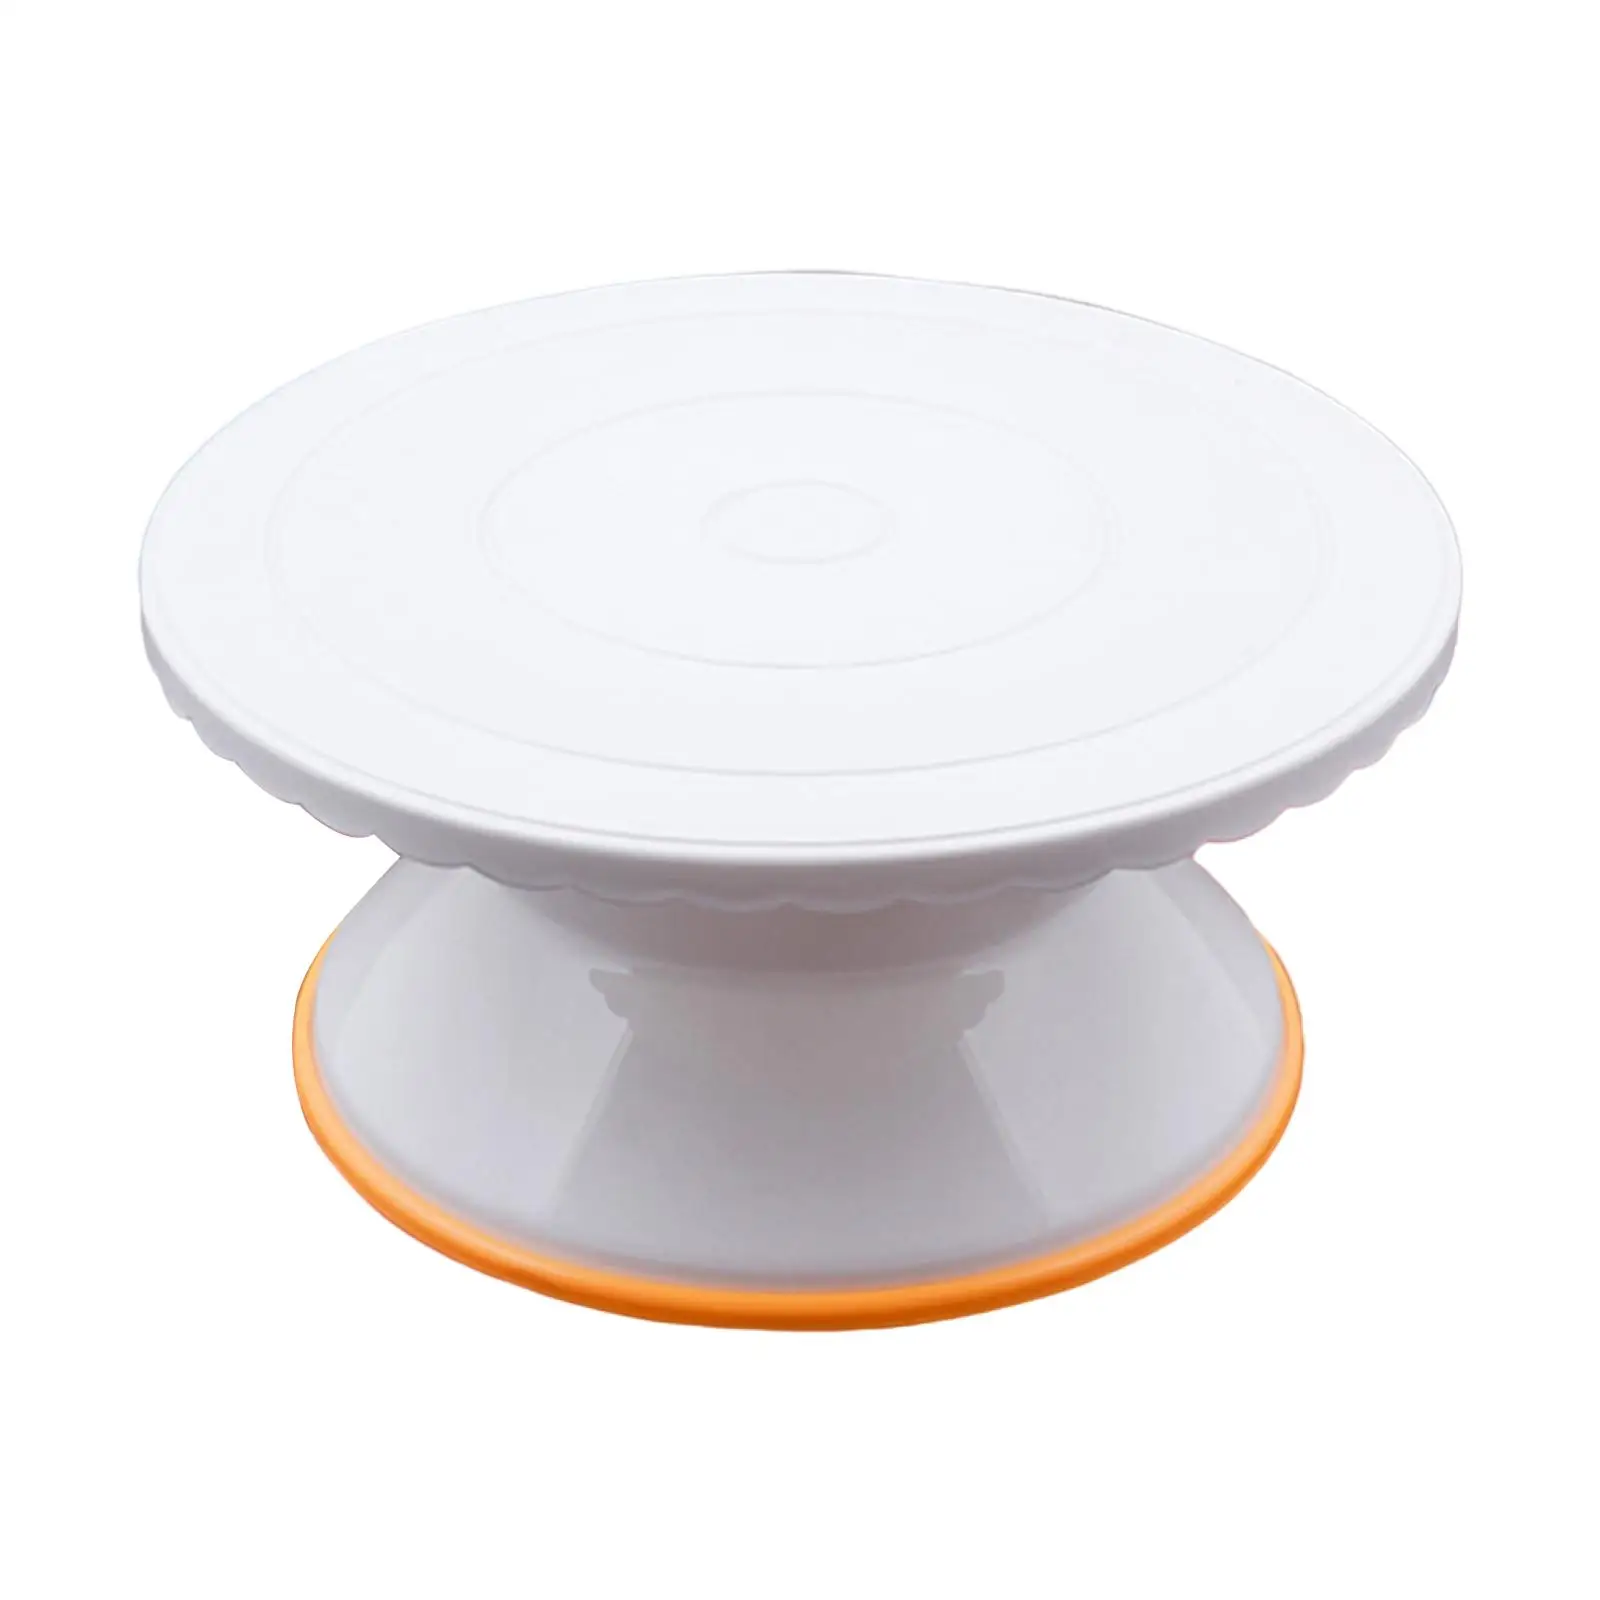 Turntable Cake Stand Kitchen DIY Baking Tool Plastic Cake Decorating Accessories